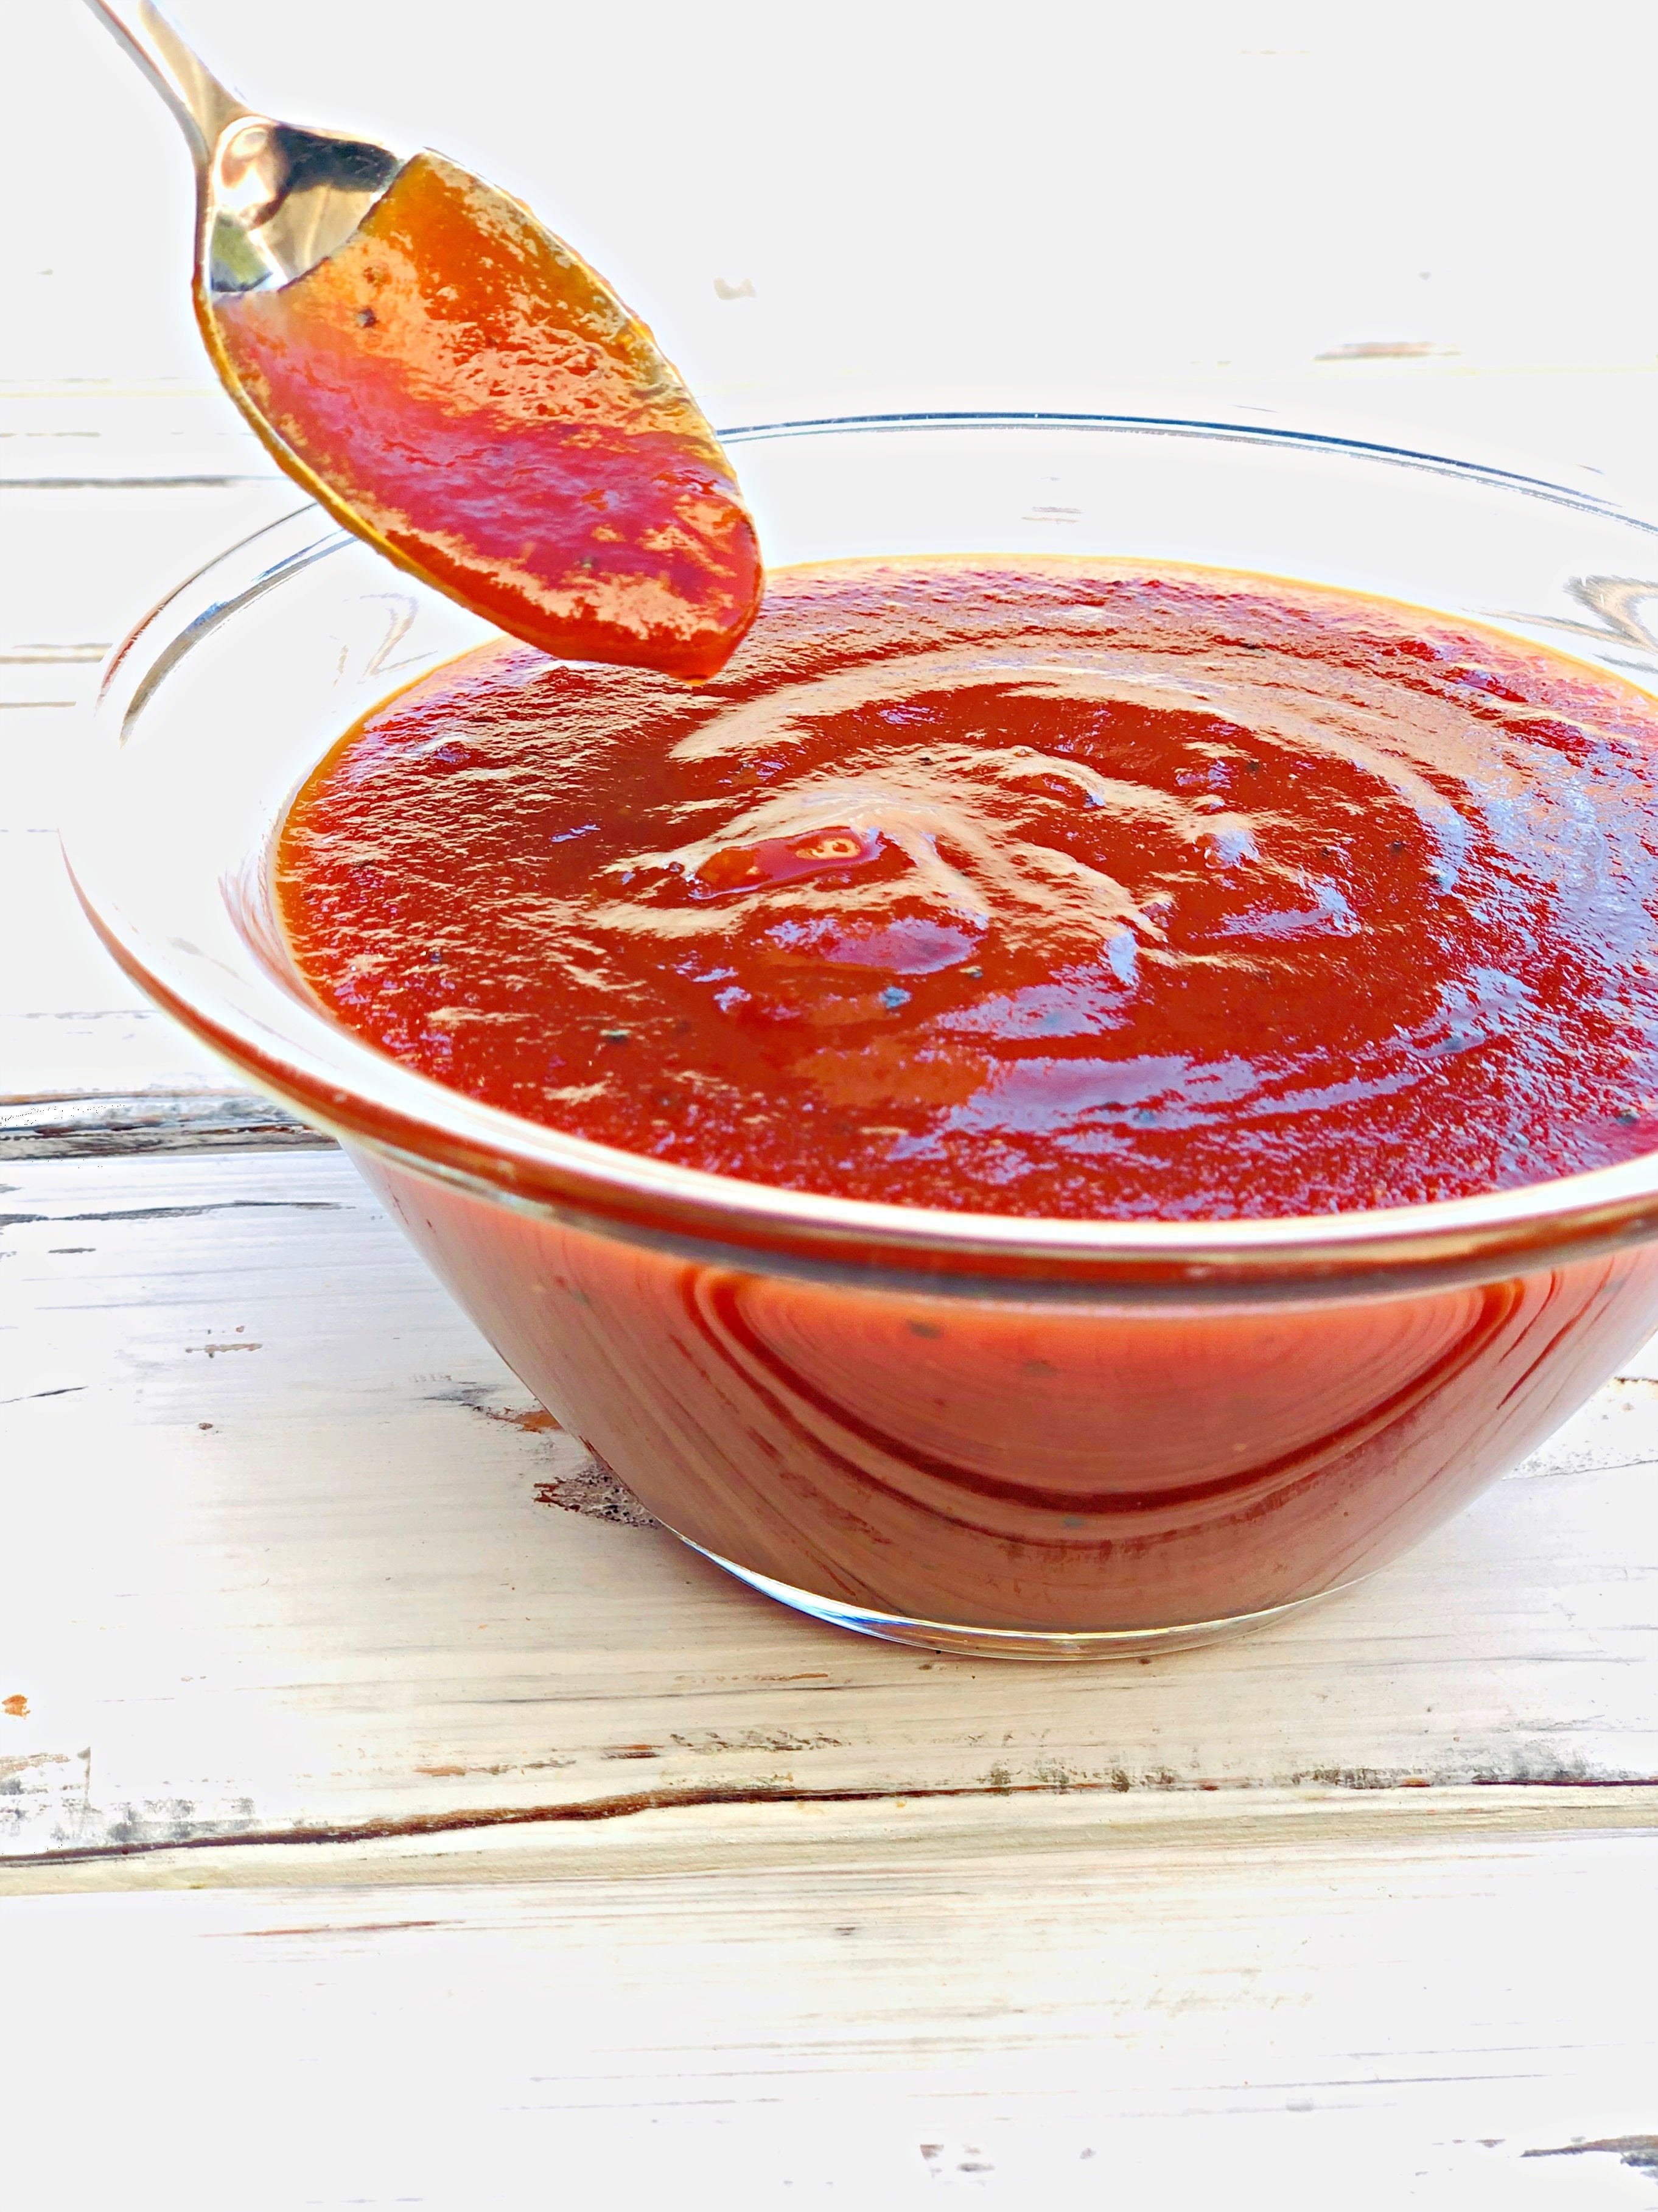 West North Carolina tomato and vinegar-based sauce is a Southern cooking staple that is very easy to make with simple pantry ingredients. #carolinabbqsauce #thiswifecooksrecipes #ketchupbasedbbqsauce #savorybbqsauce via @thiswifecooks